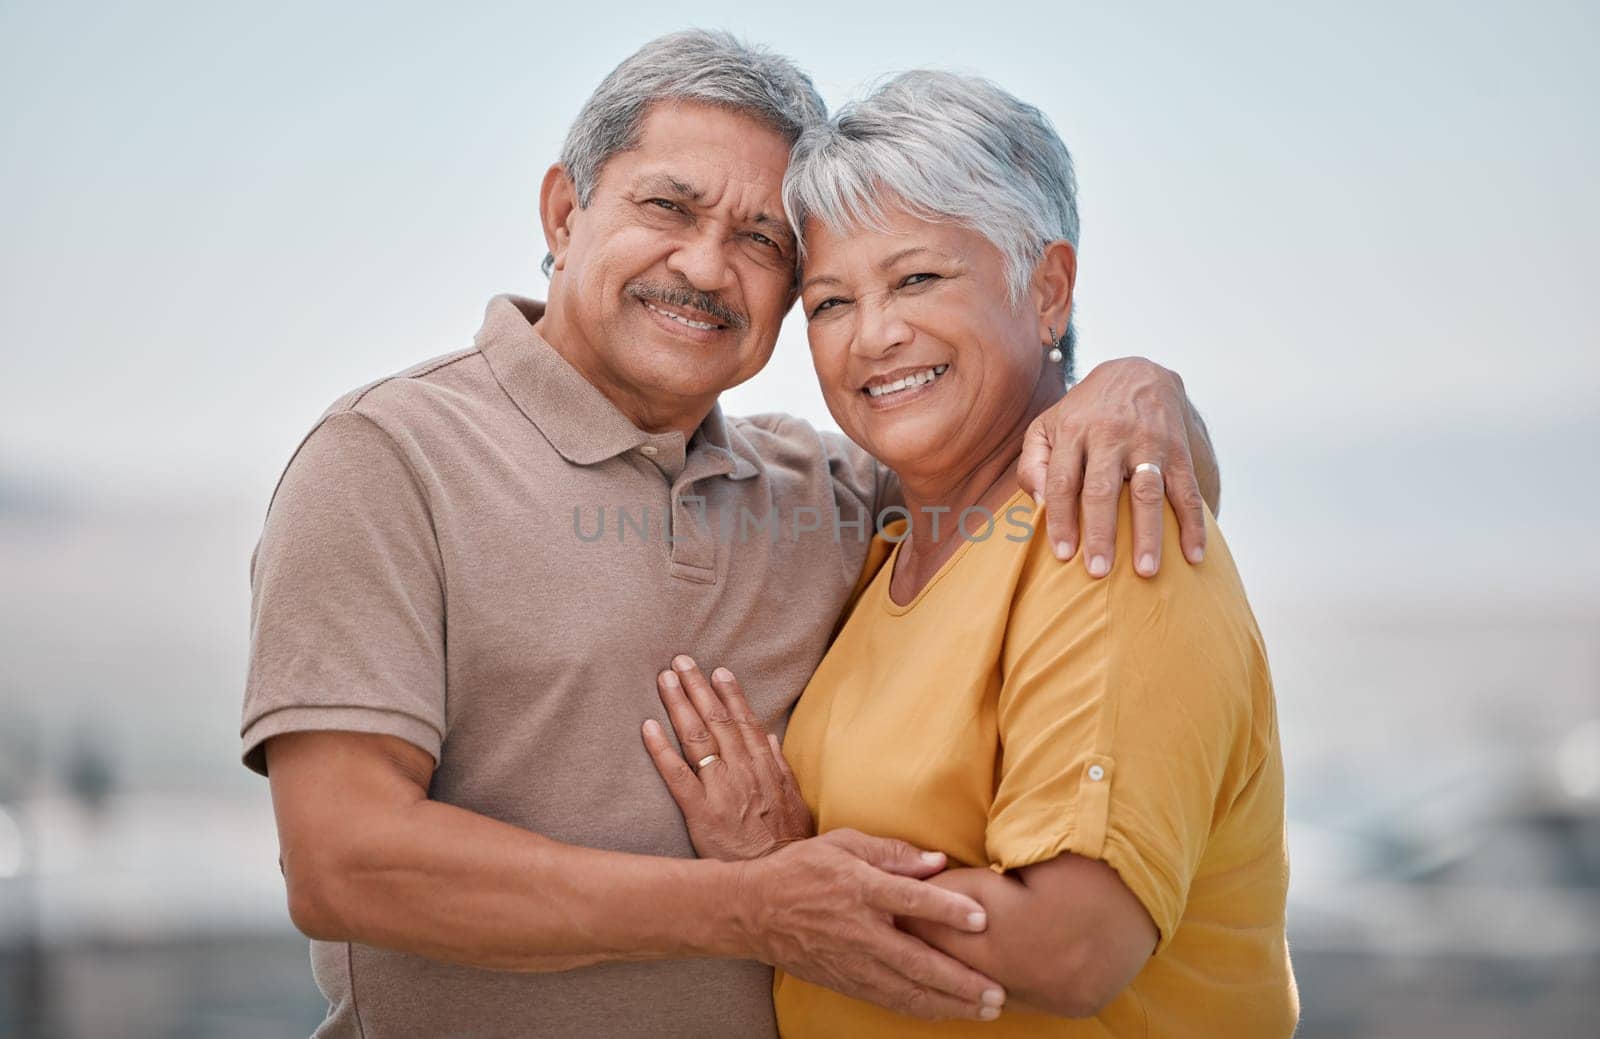 Happy, love and portrait of a senior couple in retirement, bonding and embracing in nature. Happiness, smile and elderly man and woman from Puerto Rico hugging with care, romance and joy outdoors